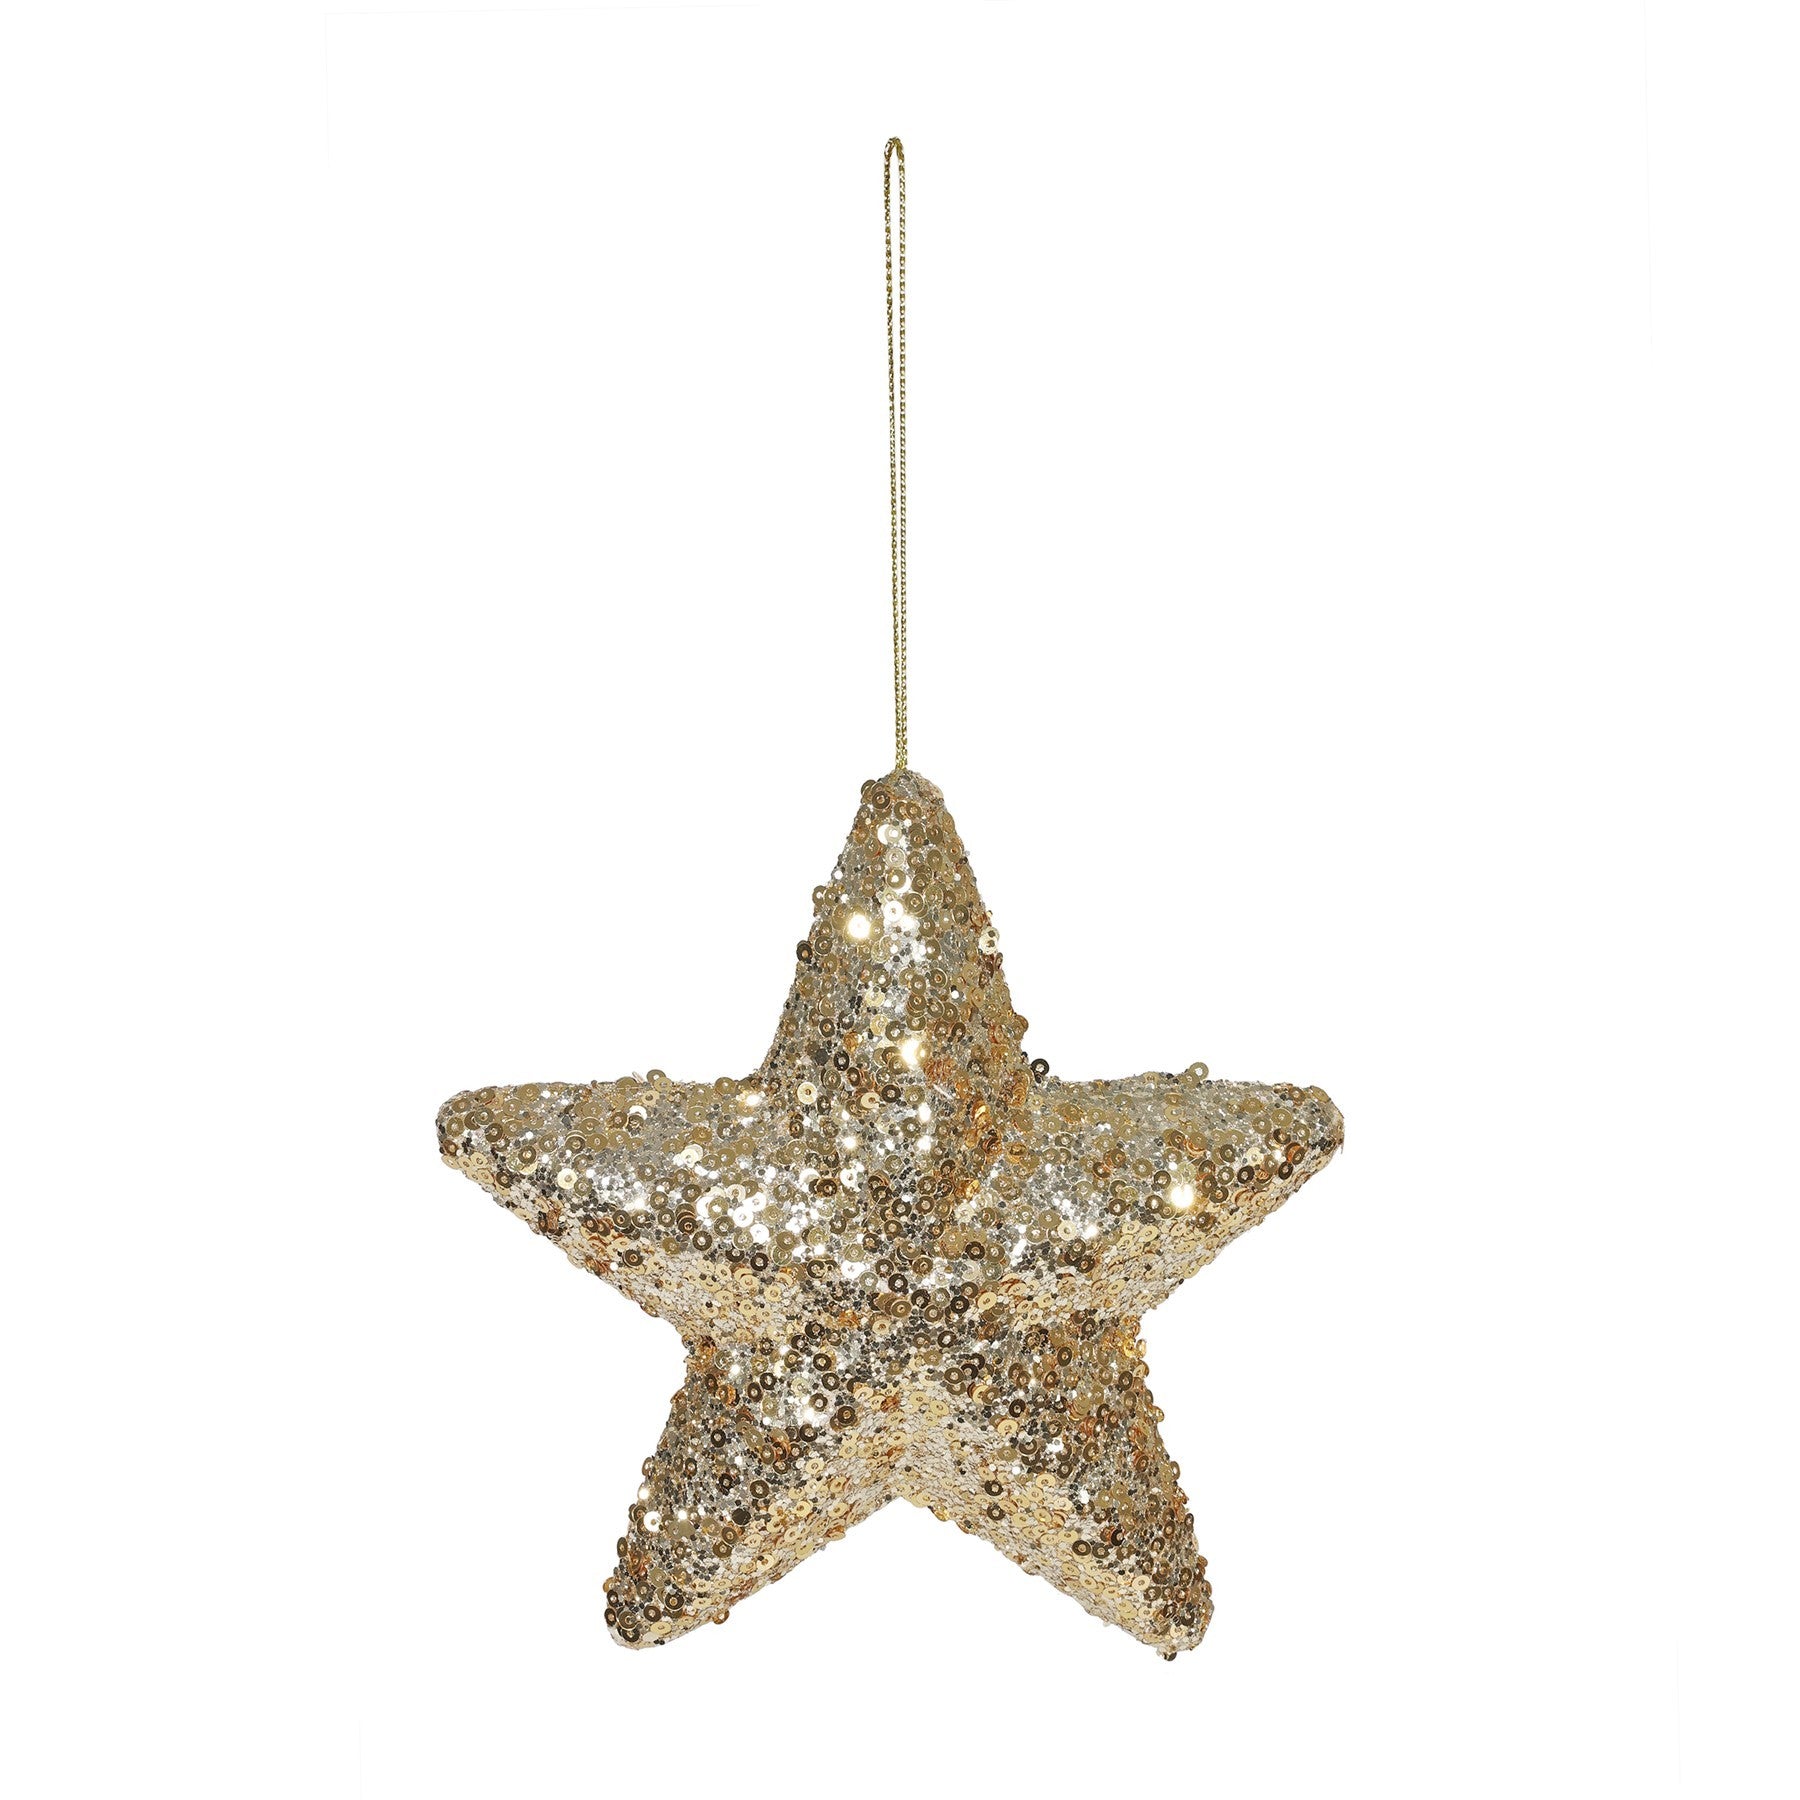 View Gold Hanging Star Decoration 15cm information